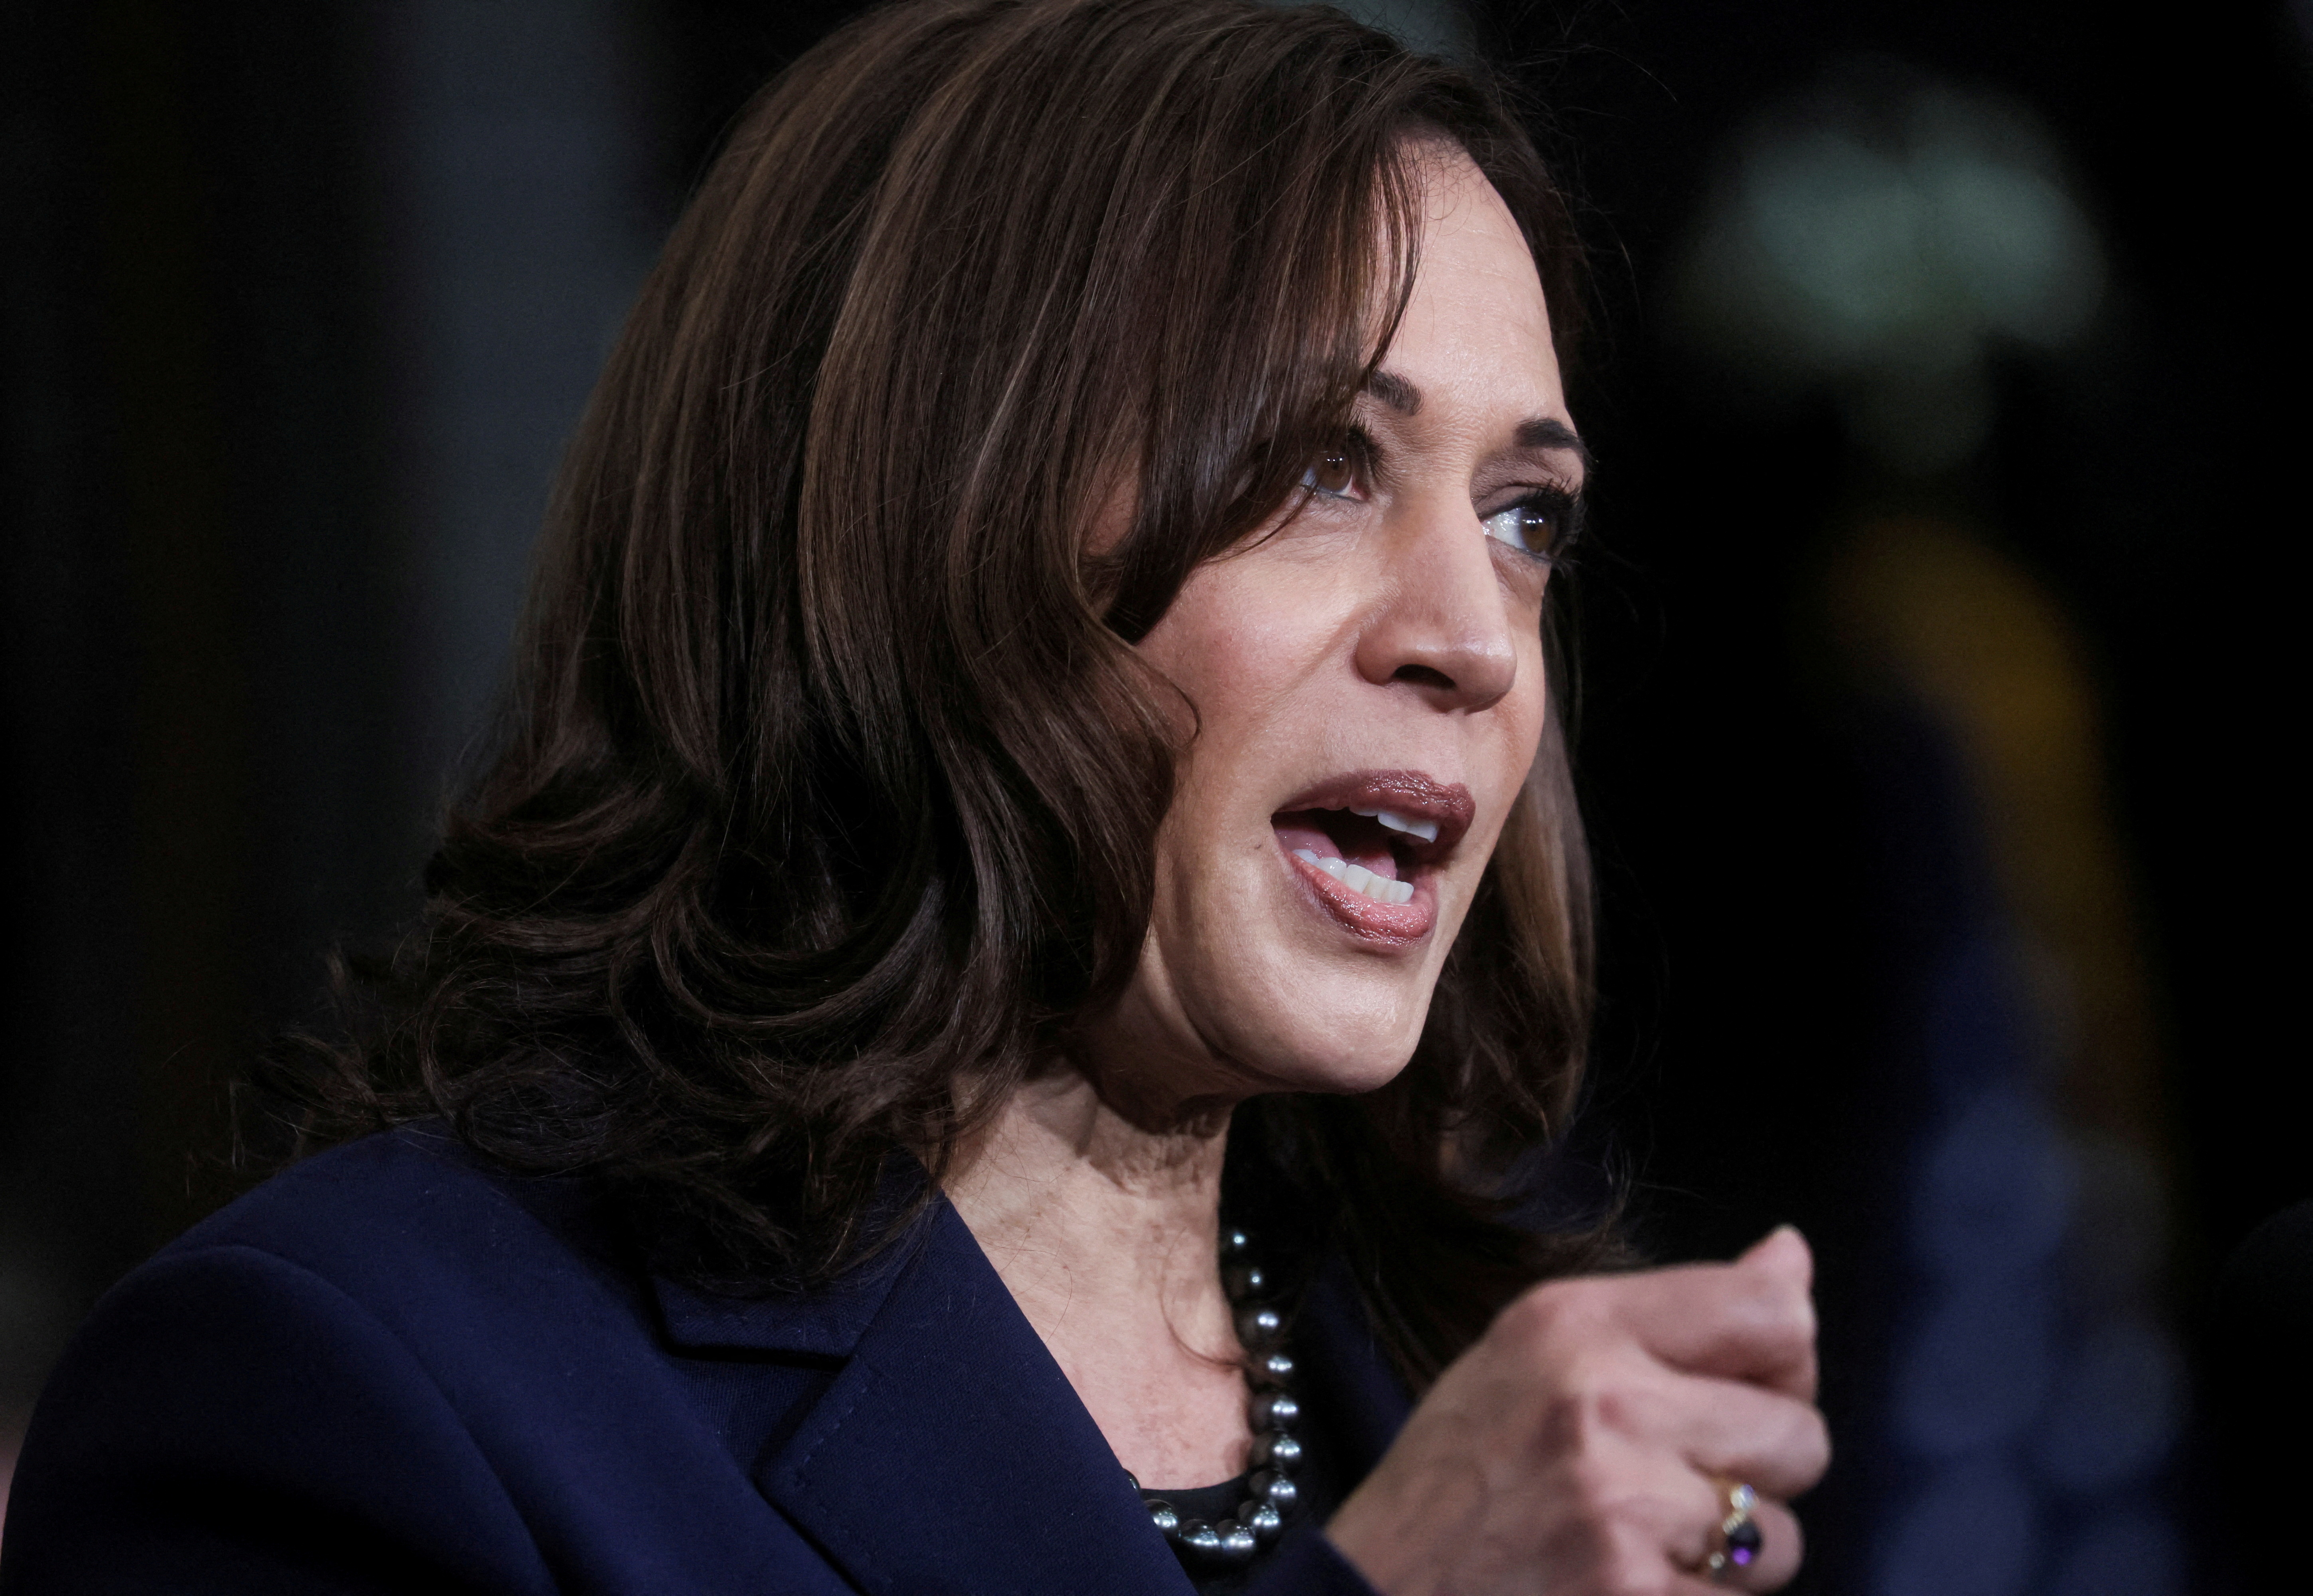 U.S. Vice President Kamala Harris speaks prior to President Joe Biden signing an executive order on federal construction project contracts and labor agreements during a visit to Ironworkers Local 5 in Upper Marlboro, Maryland, U.S., February 4, 2022. REUTERS/Leah Millis